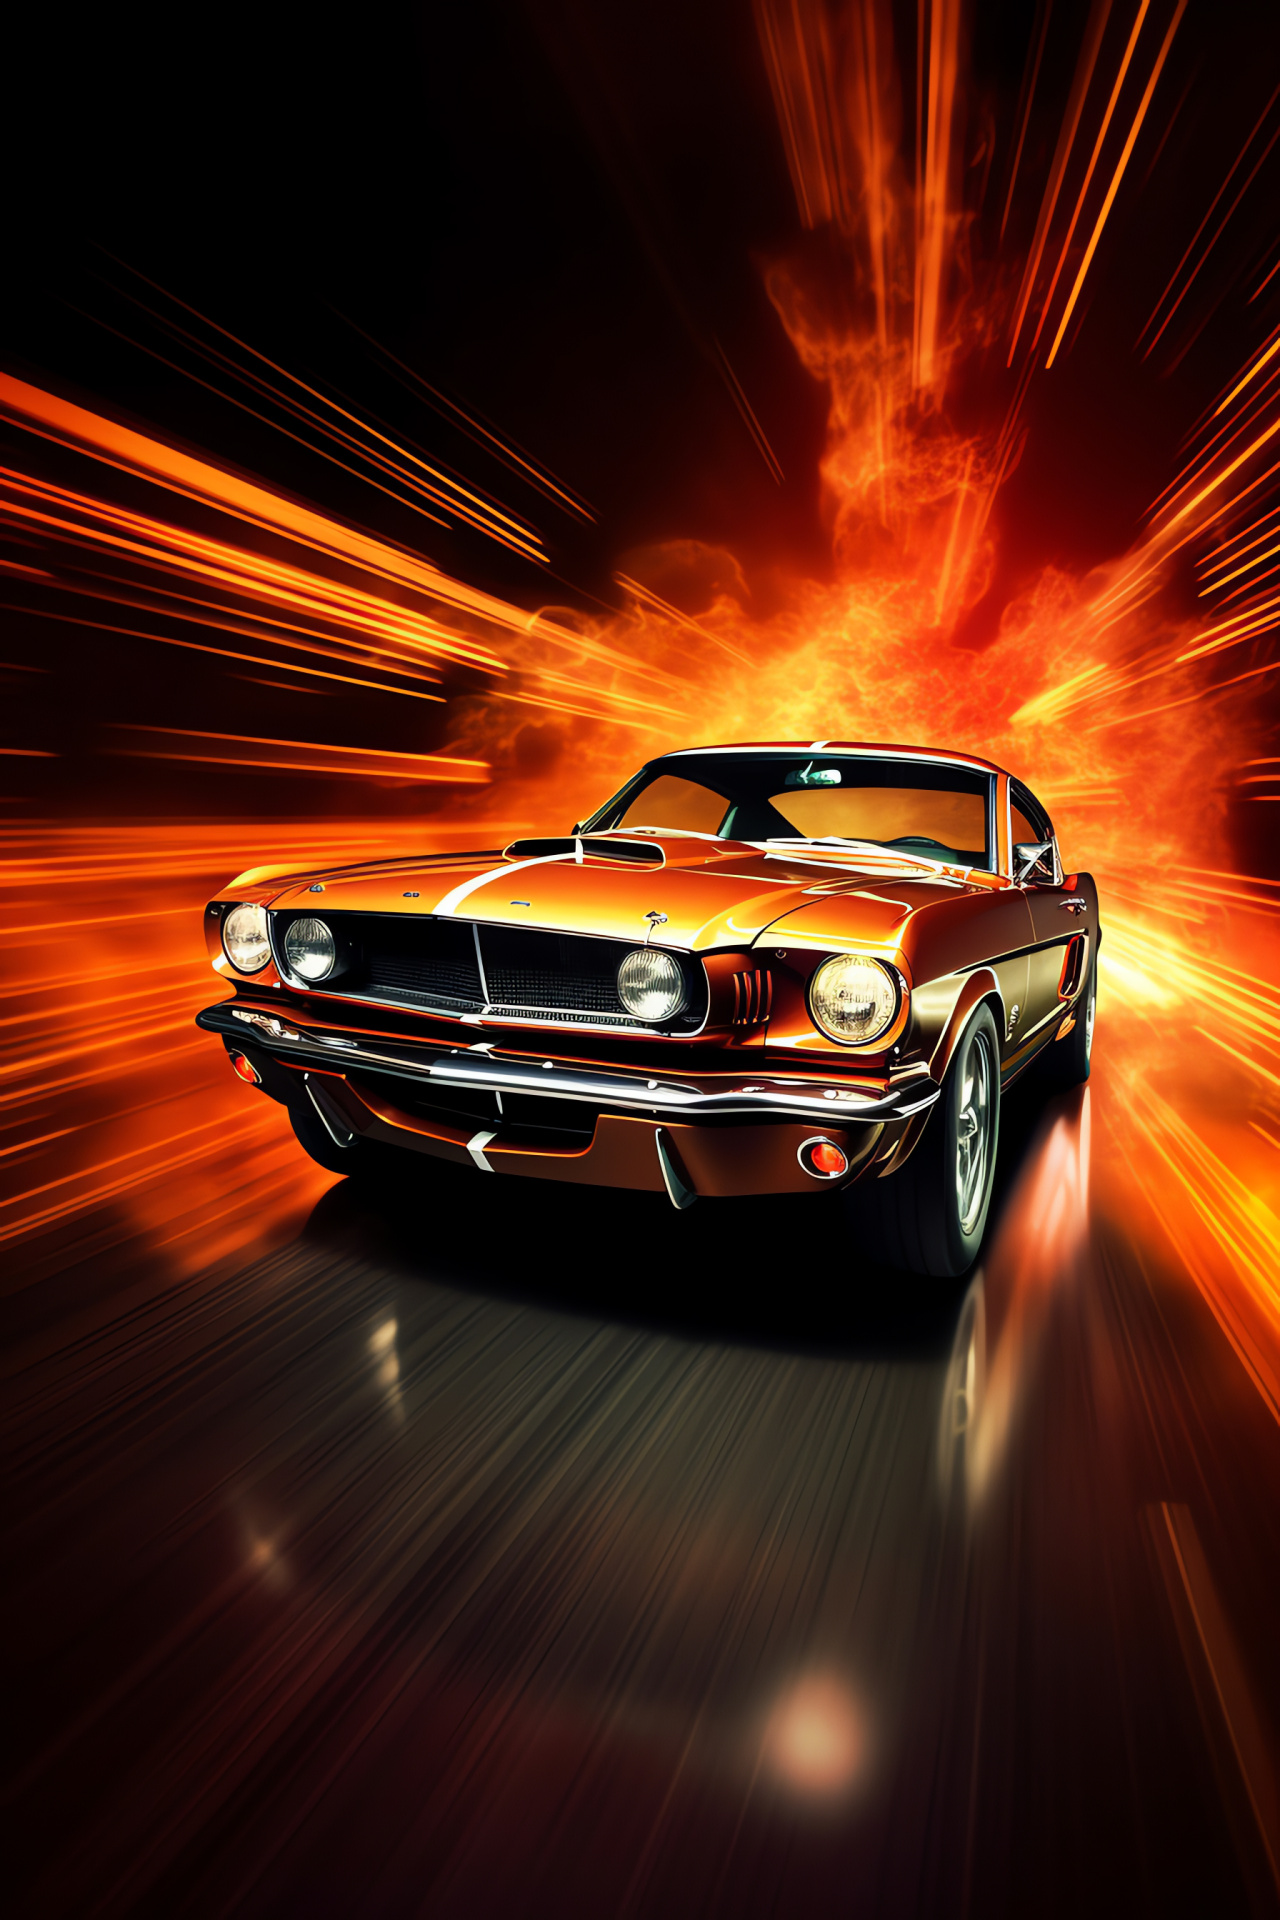 Ford Mustang, Radiant glow backdrop, Automotive dynamism, Muscle car stance, Engineering marvel, HD Phone Wallpaper